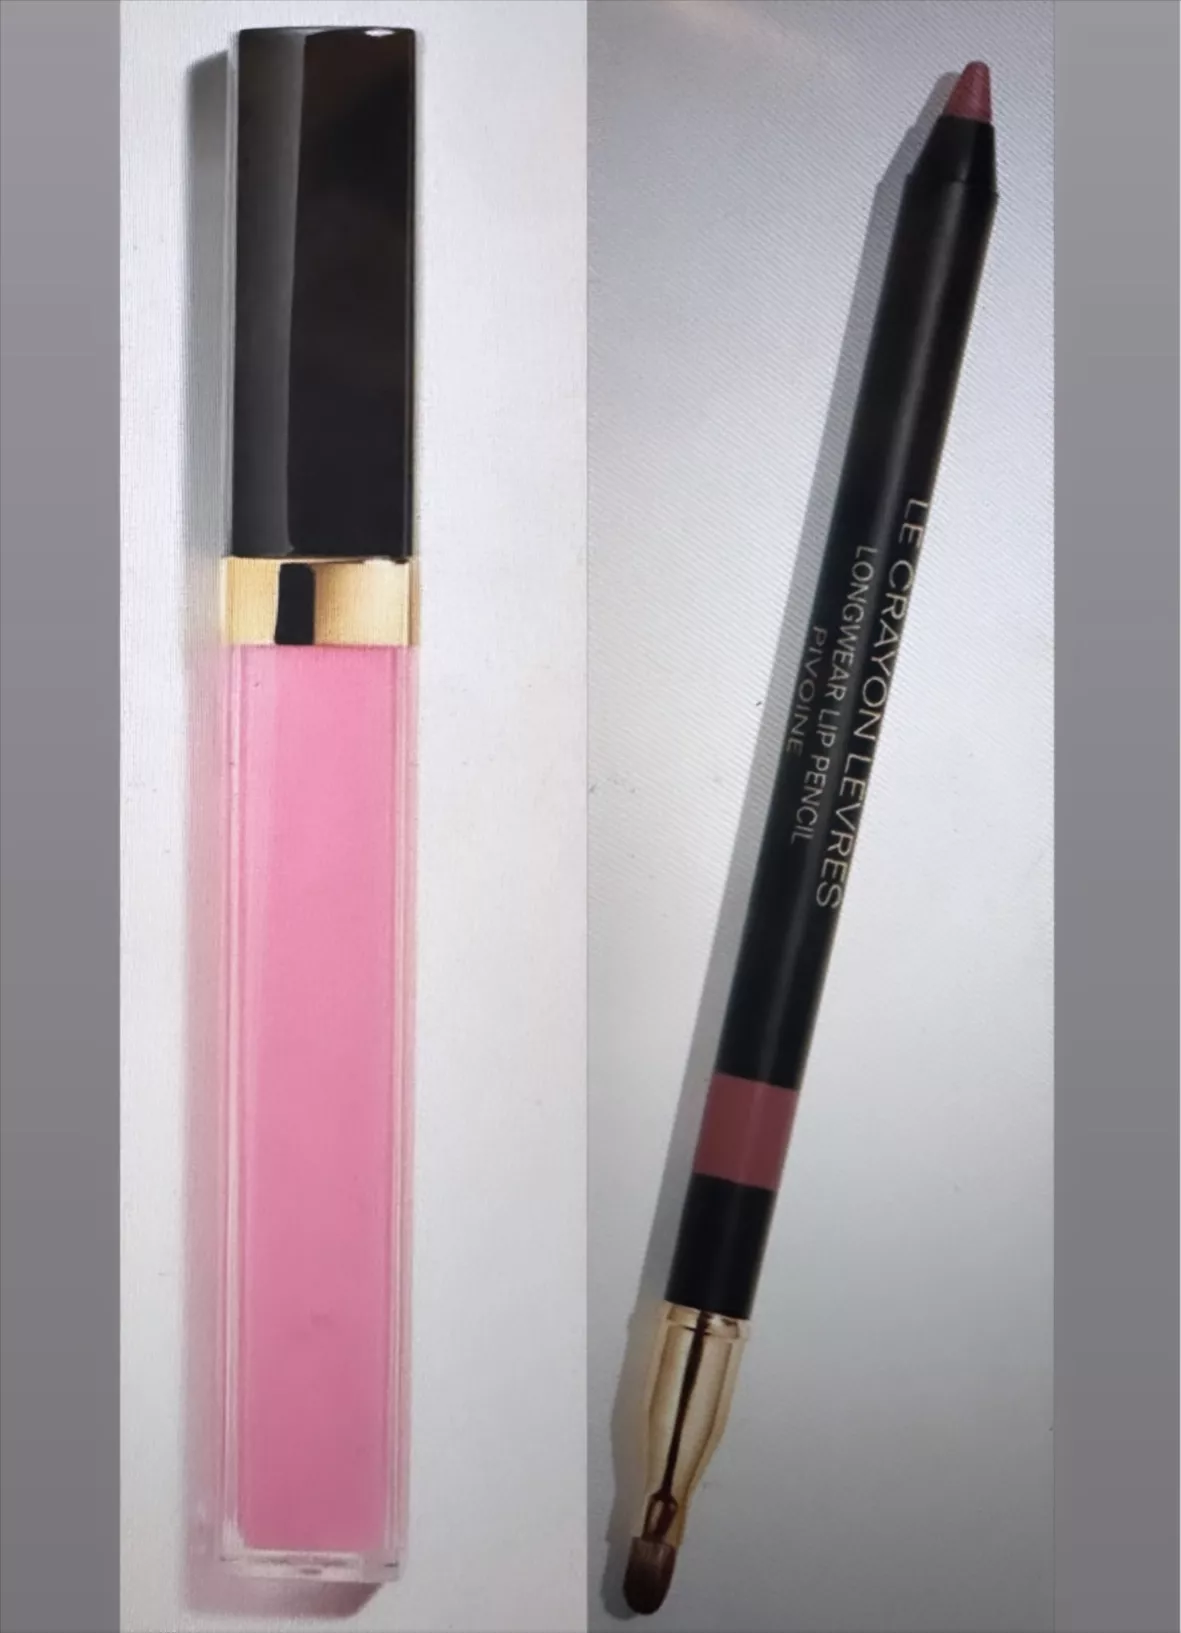 Chanel+Rouge+Coco+Moisturizing+Gloss+-+804+Rose for sale online